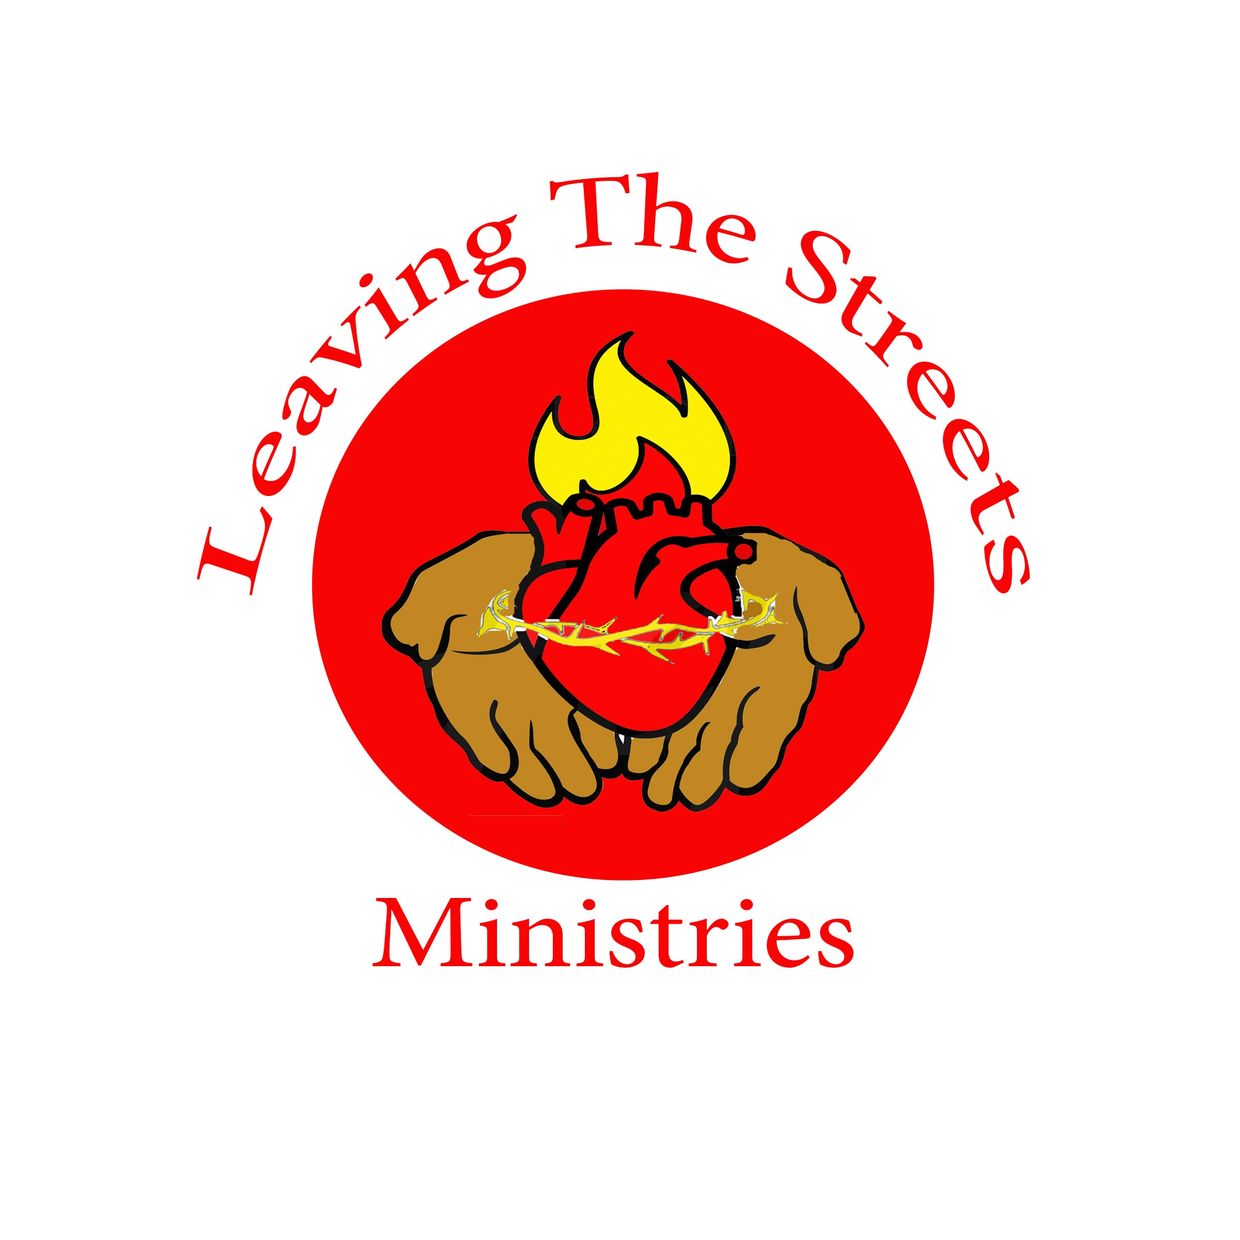 Leaving the Streets mission and business objective is to provide resources and assistance.
